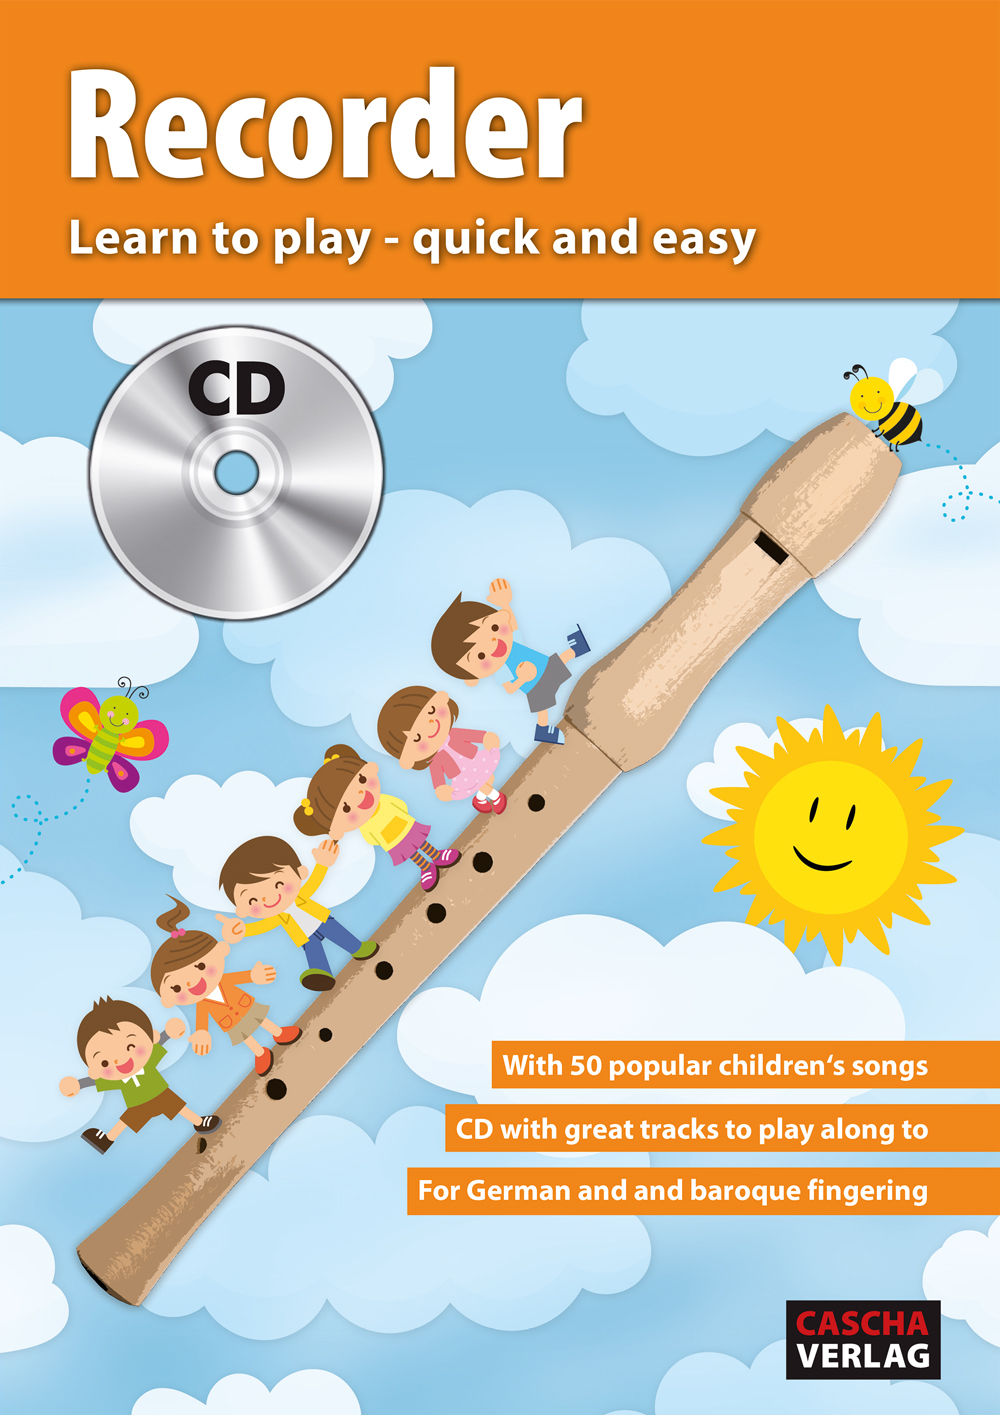 Recorder - Learn to play quick and easy